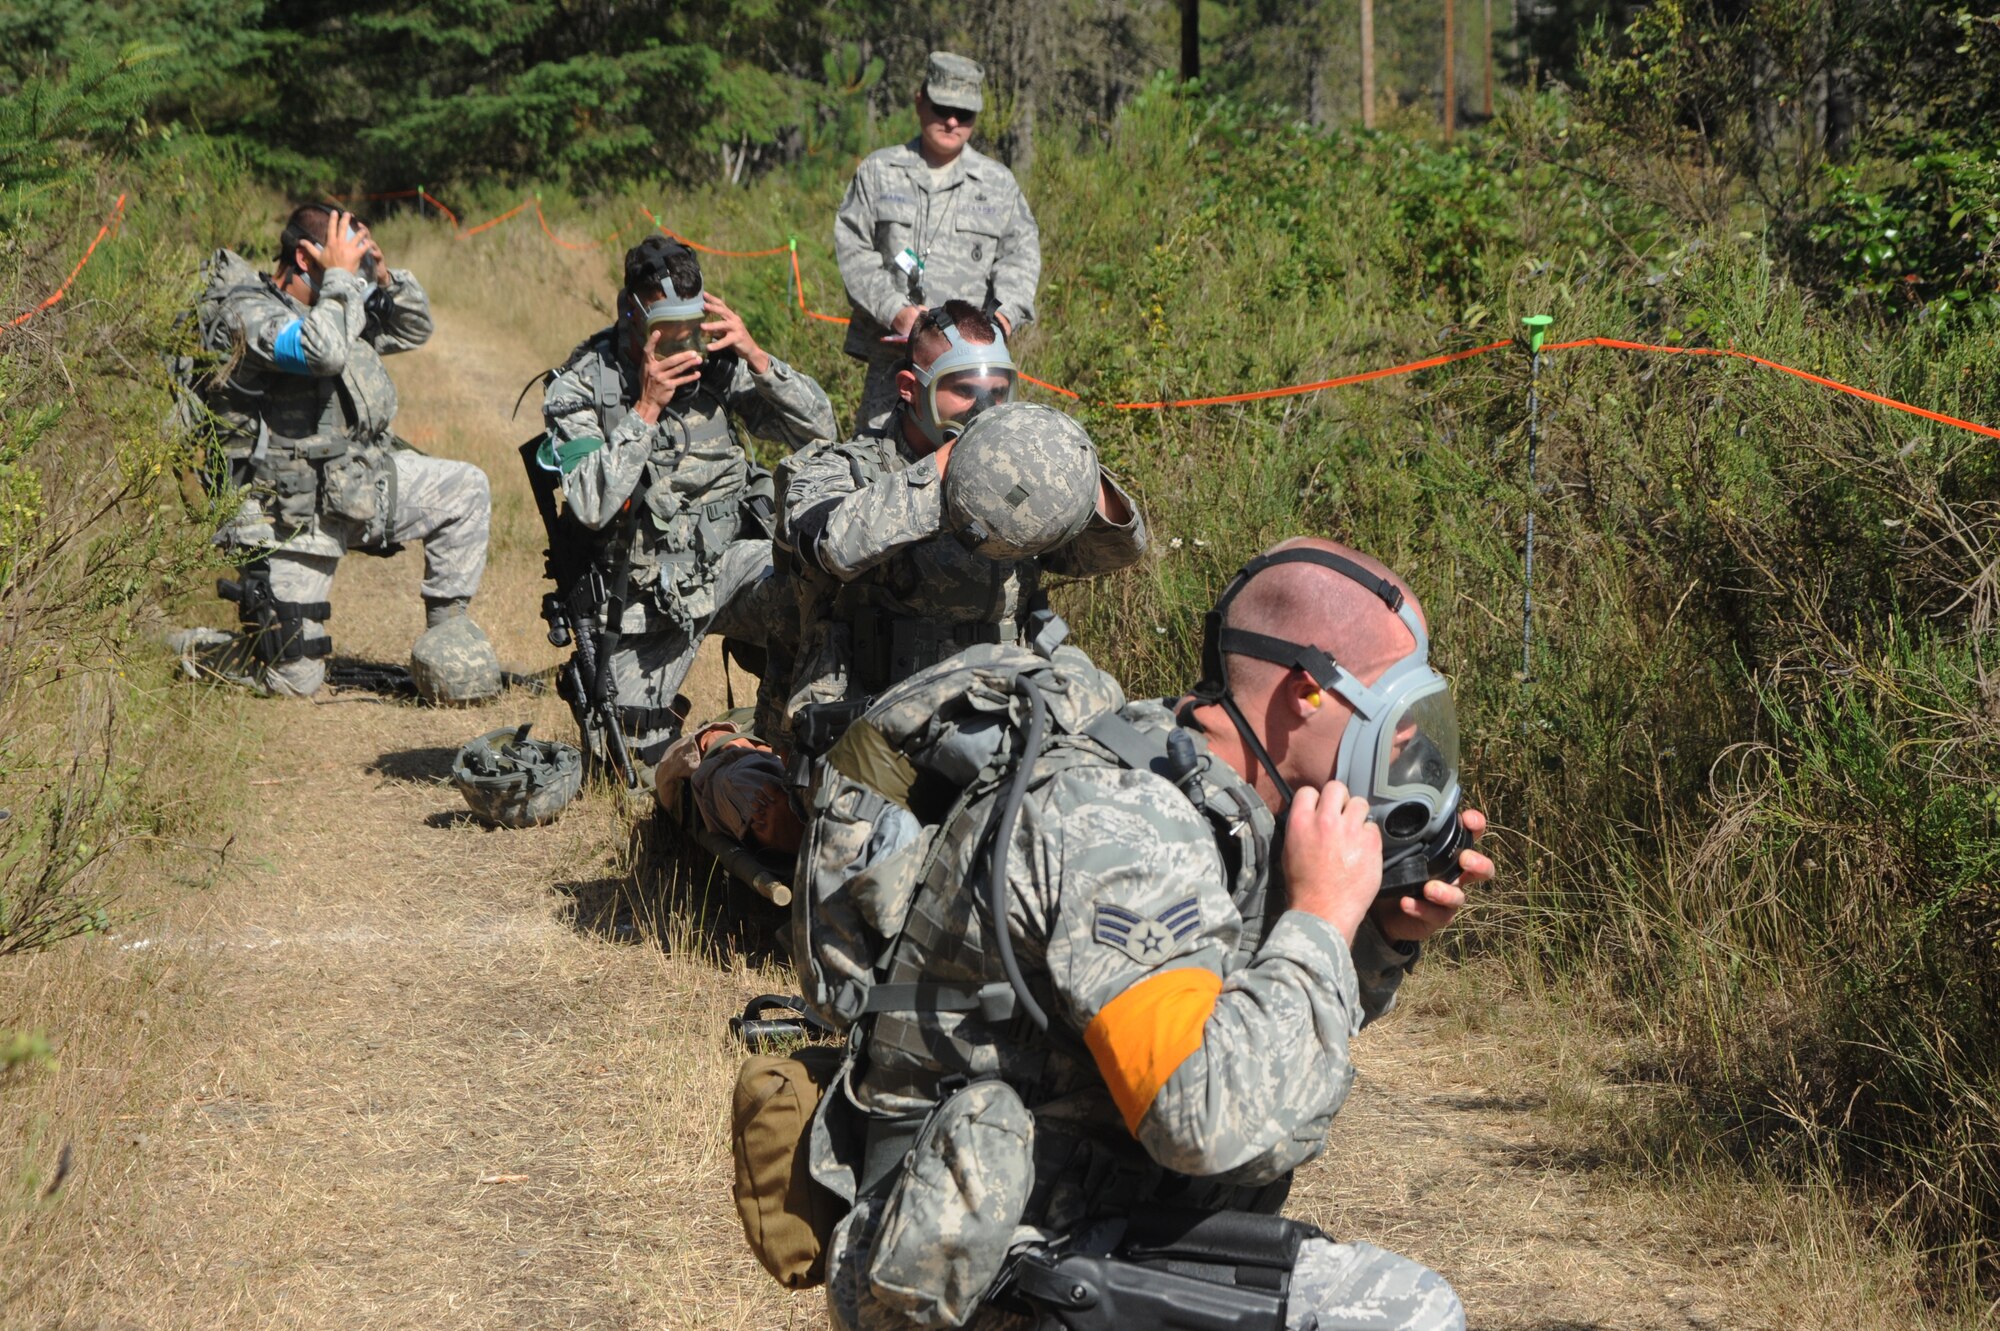 Members of Team Little Rock put on their gas masks during the Combat Weapons Course at Fort Lewis, Wash., as part of Air Mobility RODEO 2009, July 20. RODEO is an international combat skills and flying operations competition designed to develop and improve techniques and procedures with our international partners to enhance mobility operations. Teams participating in the Combat Weapons Course were evaluated on marksmanship, first aid, and the ability to operate in a contaminated environment. (U.S. Air Force photo by Staff Sgt. Christine Jones) (Released)